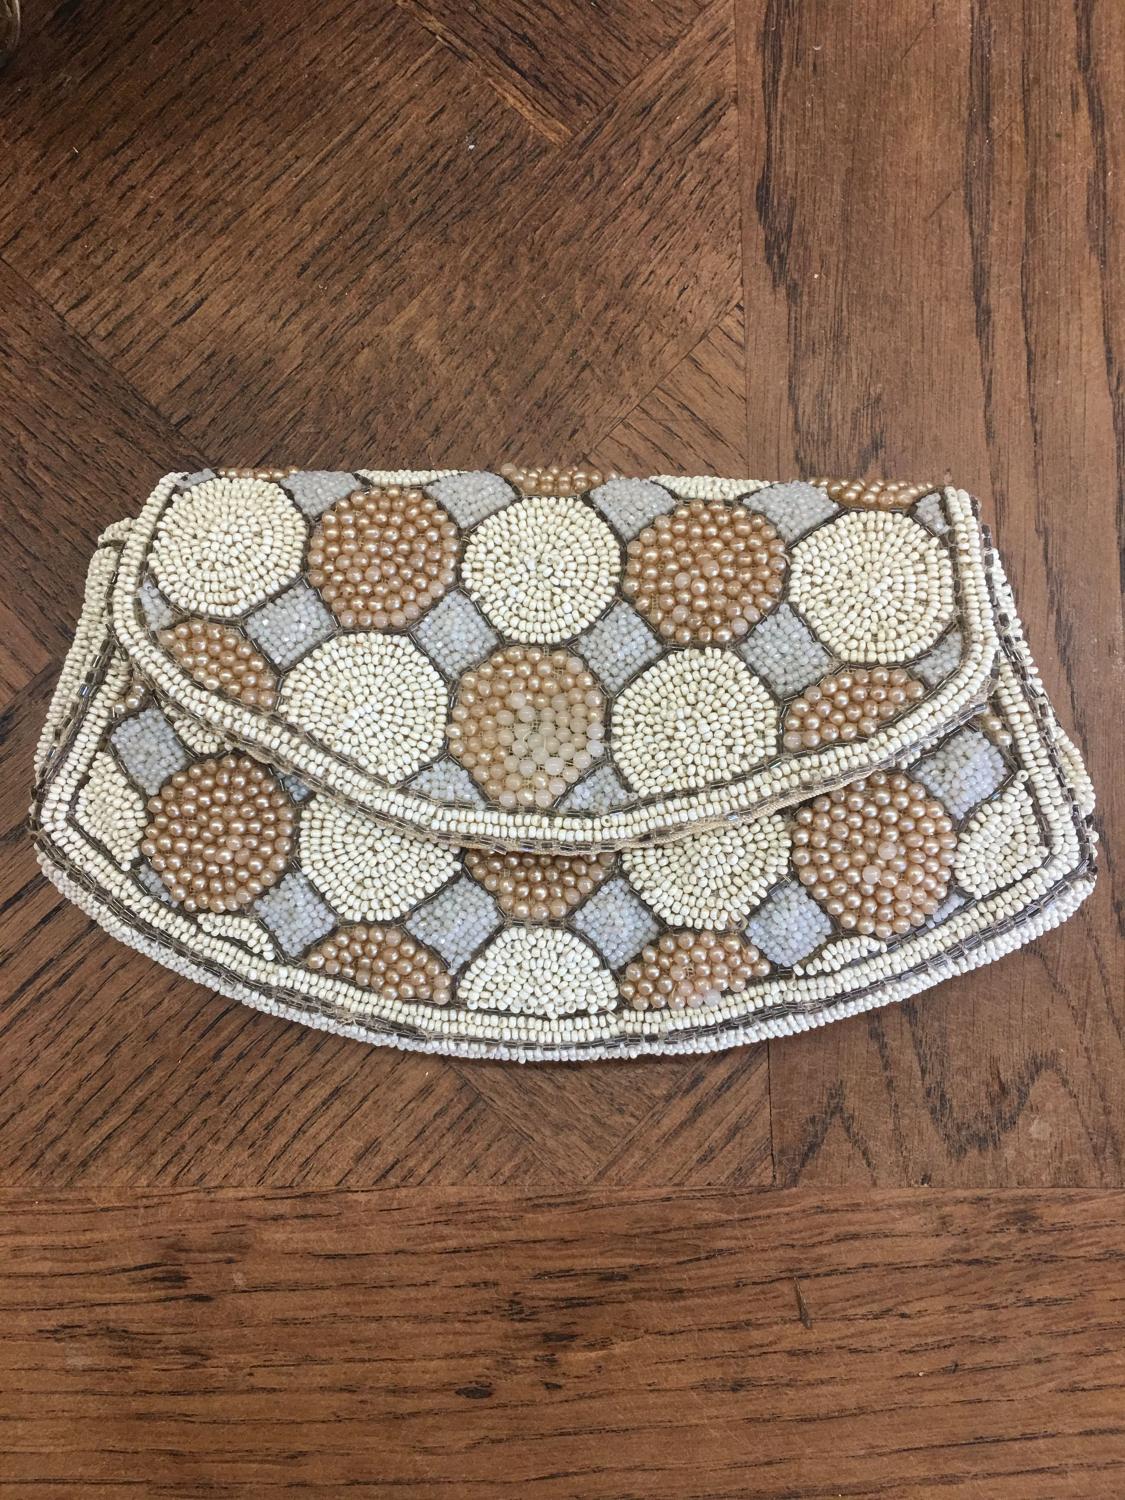 French dance purse 1920-30s